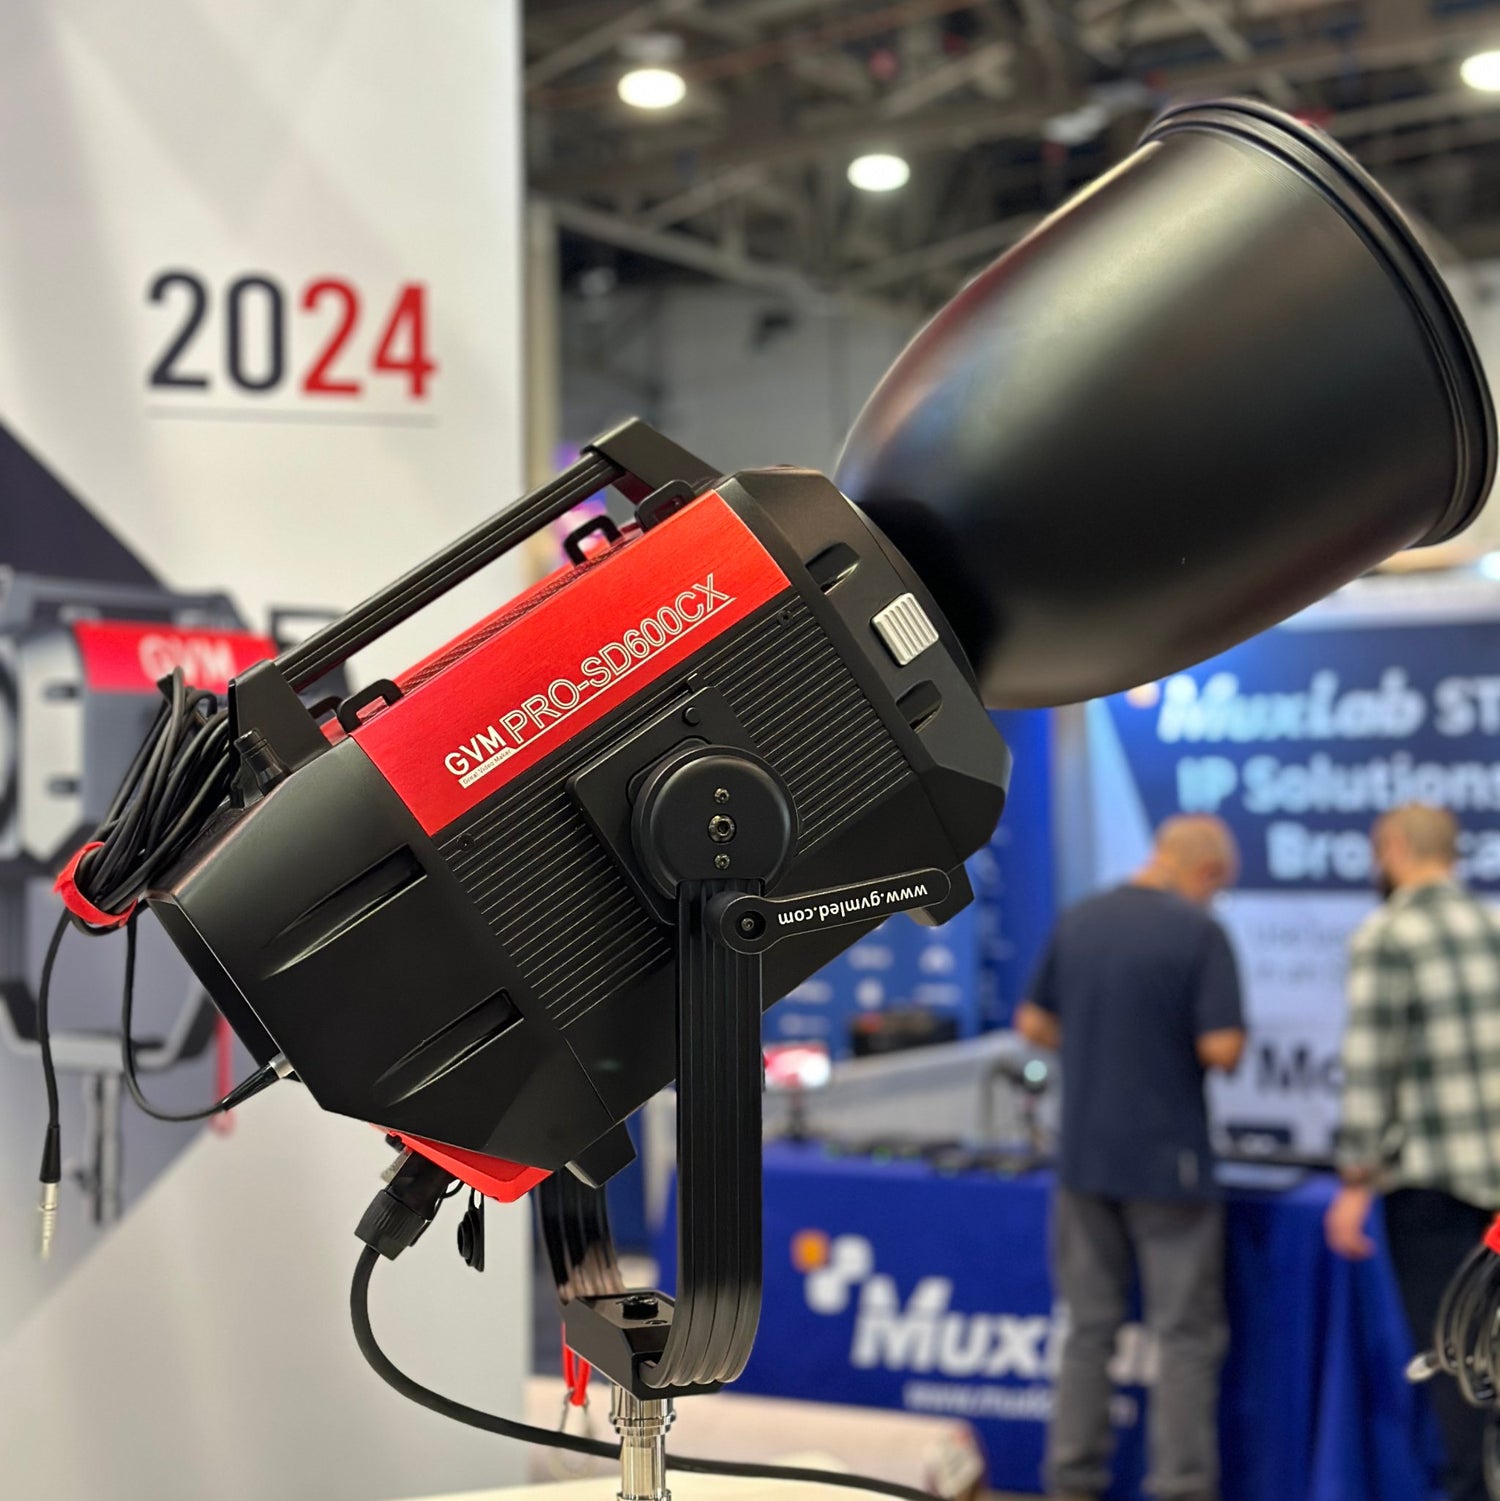 2024 Las Vegas NABShow--GVM’s mysterious products are all here - GVM